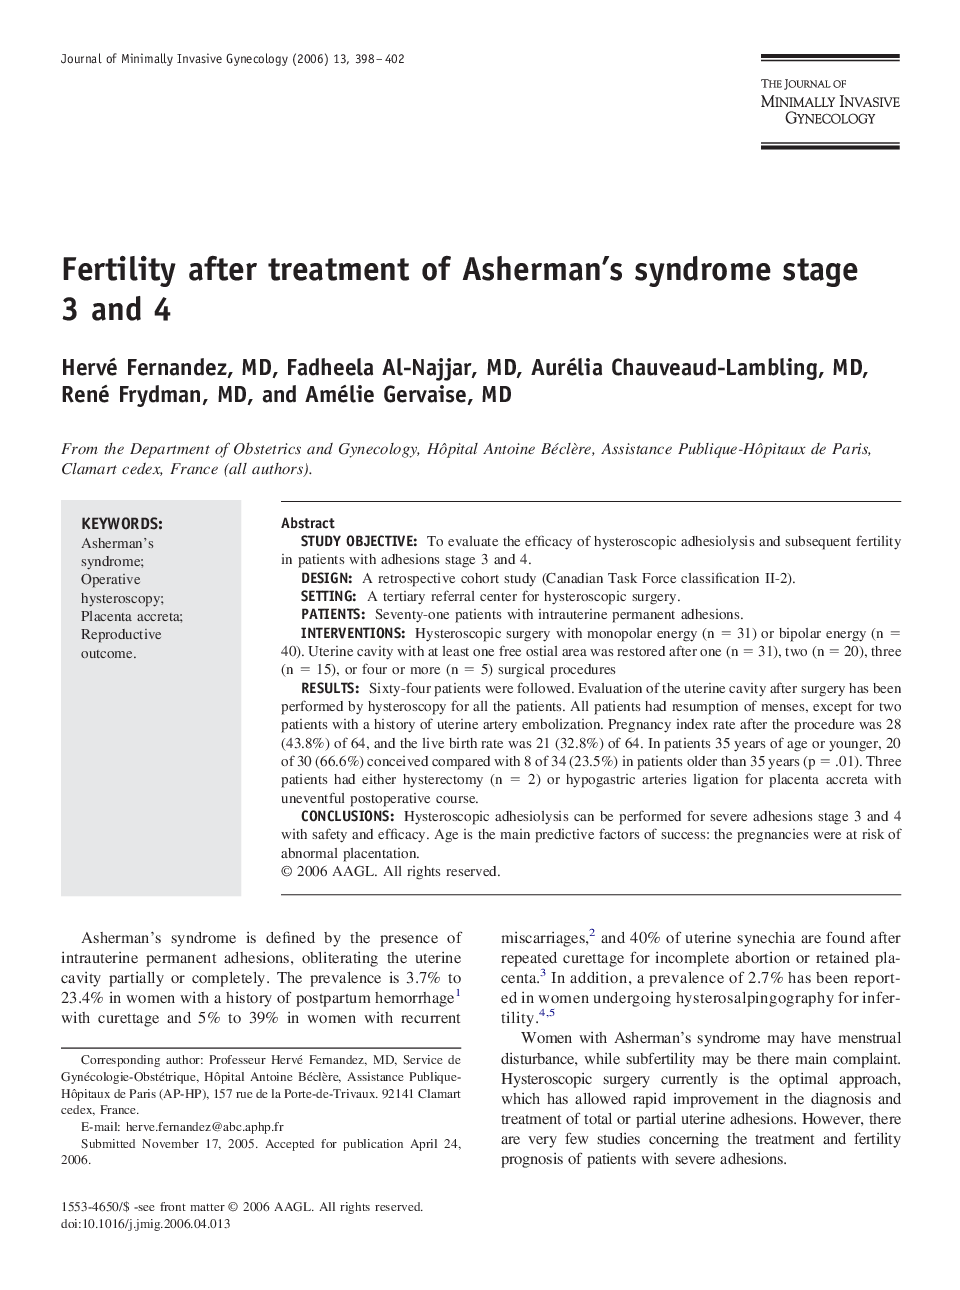 Fertility after treatment of Asherman’s syndrome stage 3 and 4